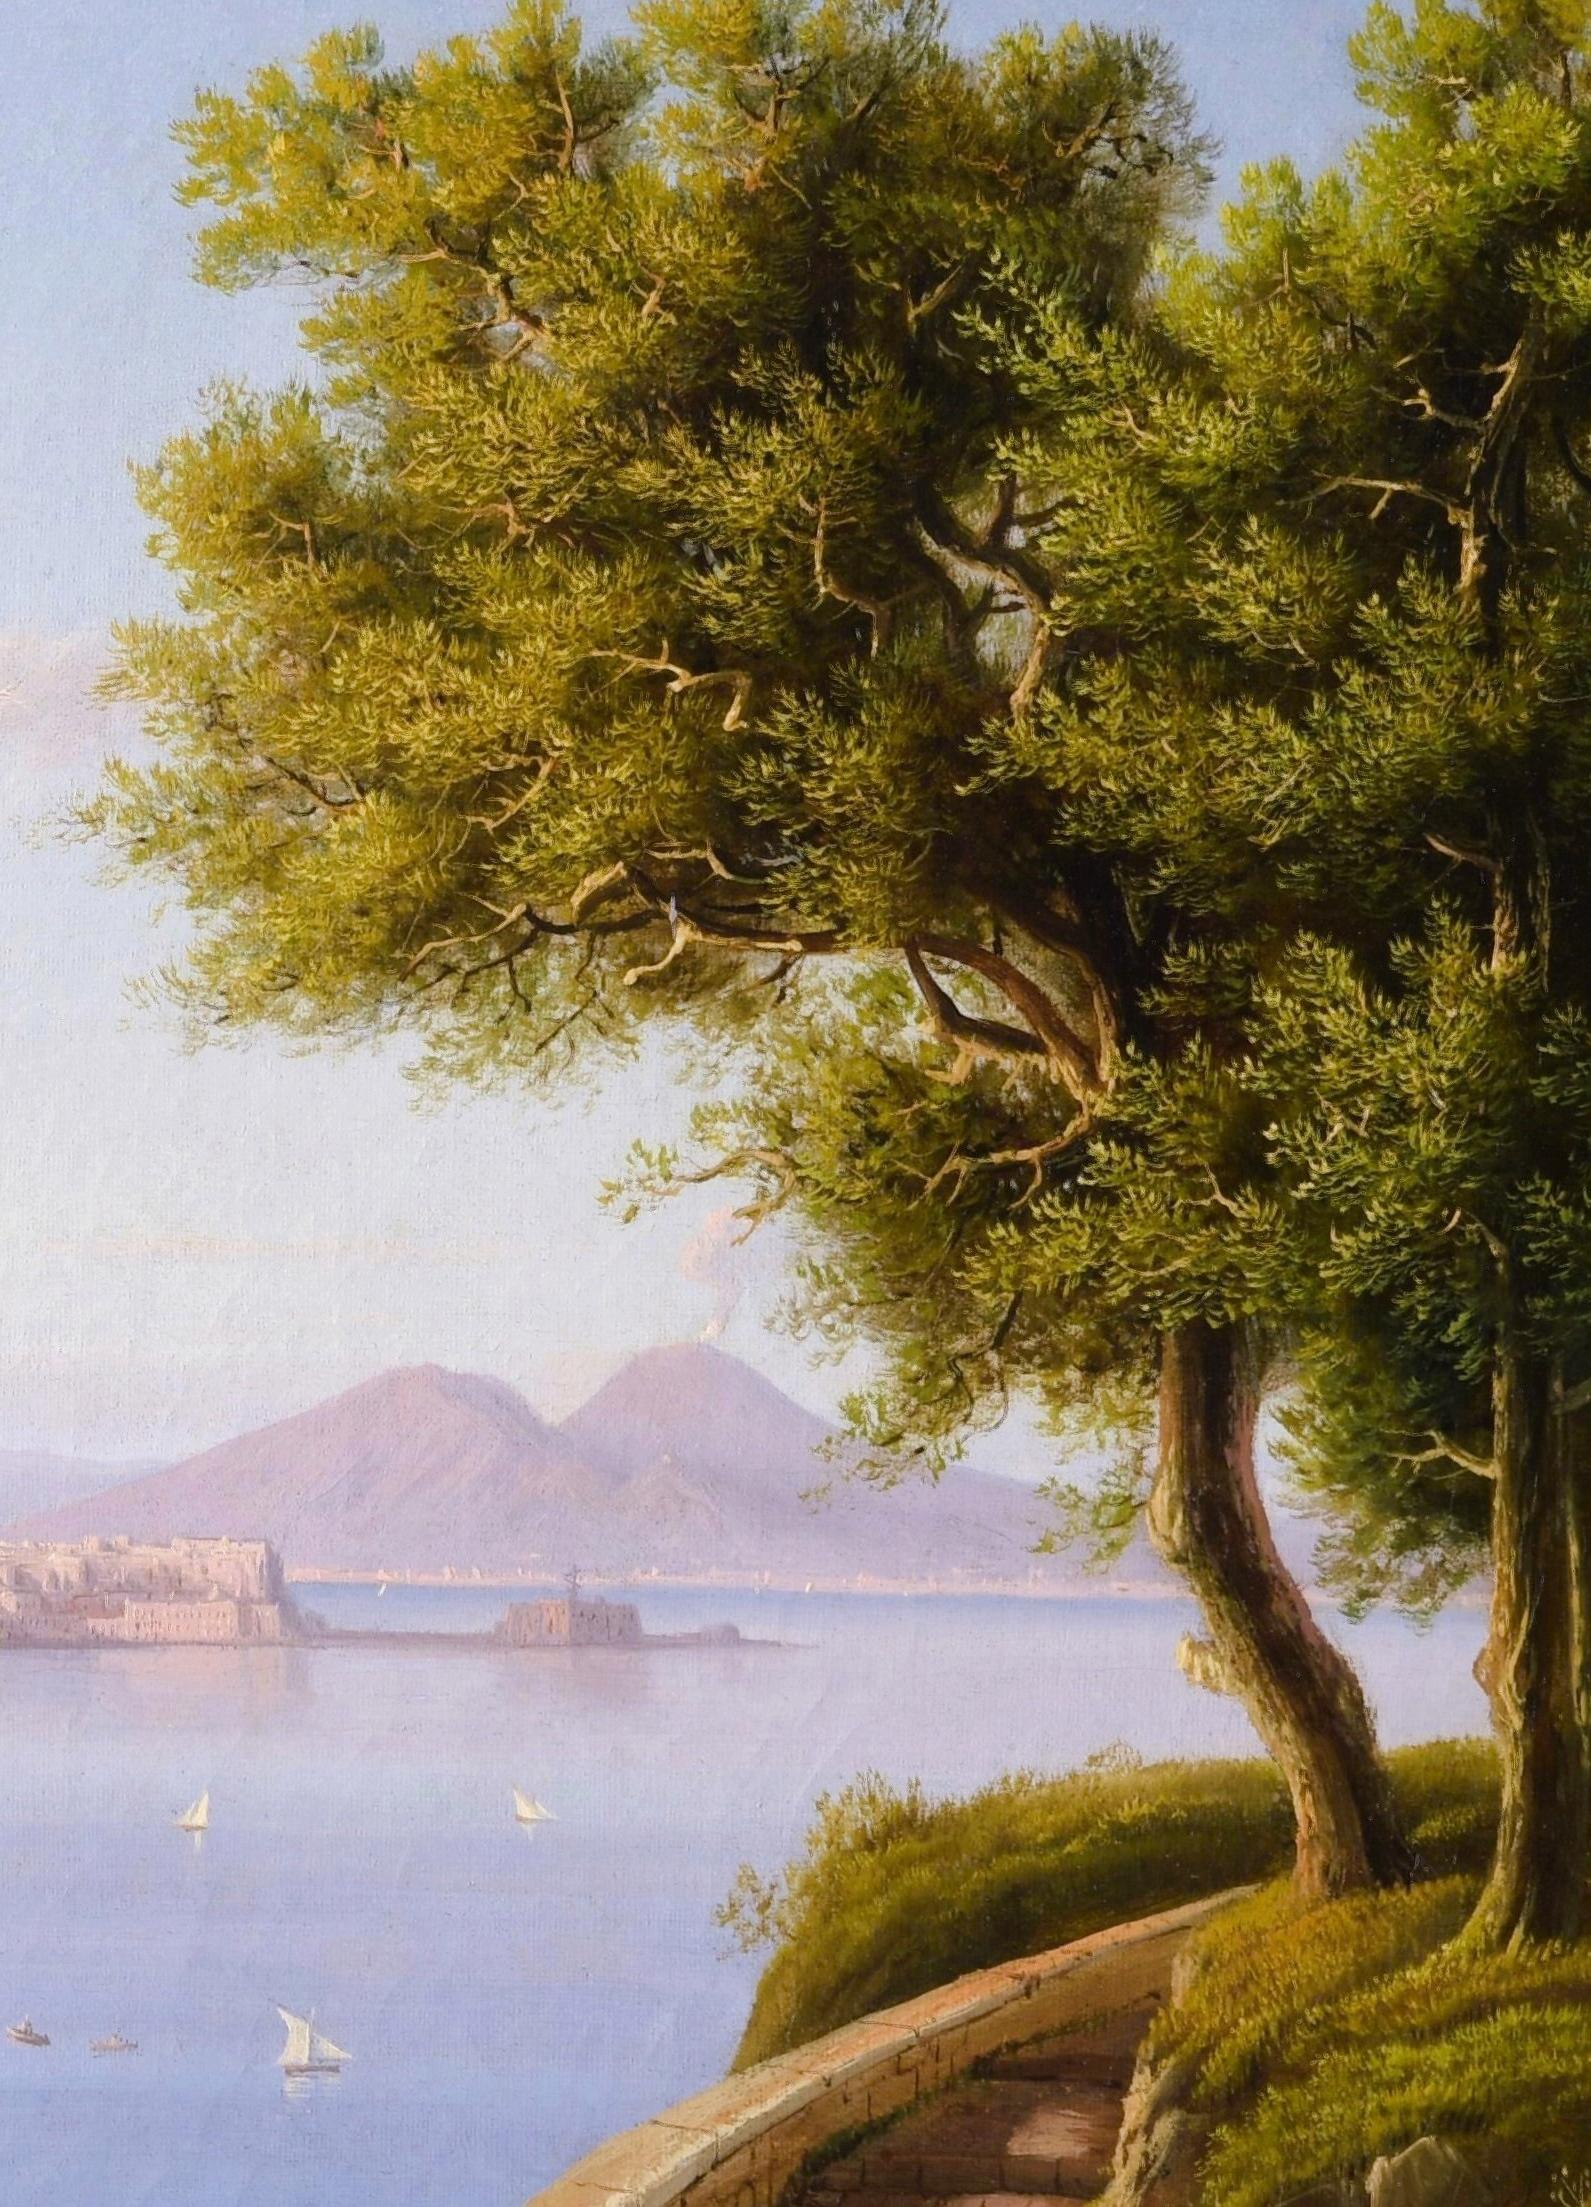 Napoly bay with the Vesuvius - Brown Figurative Painting by Carl-Wilhelm Götzloff